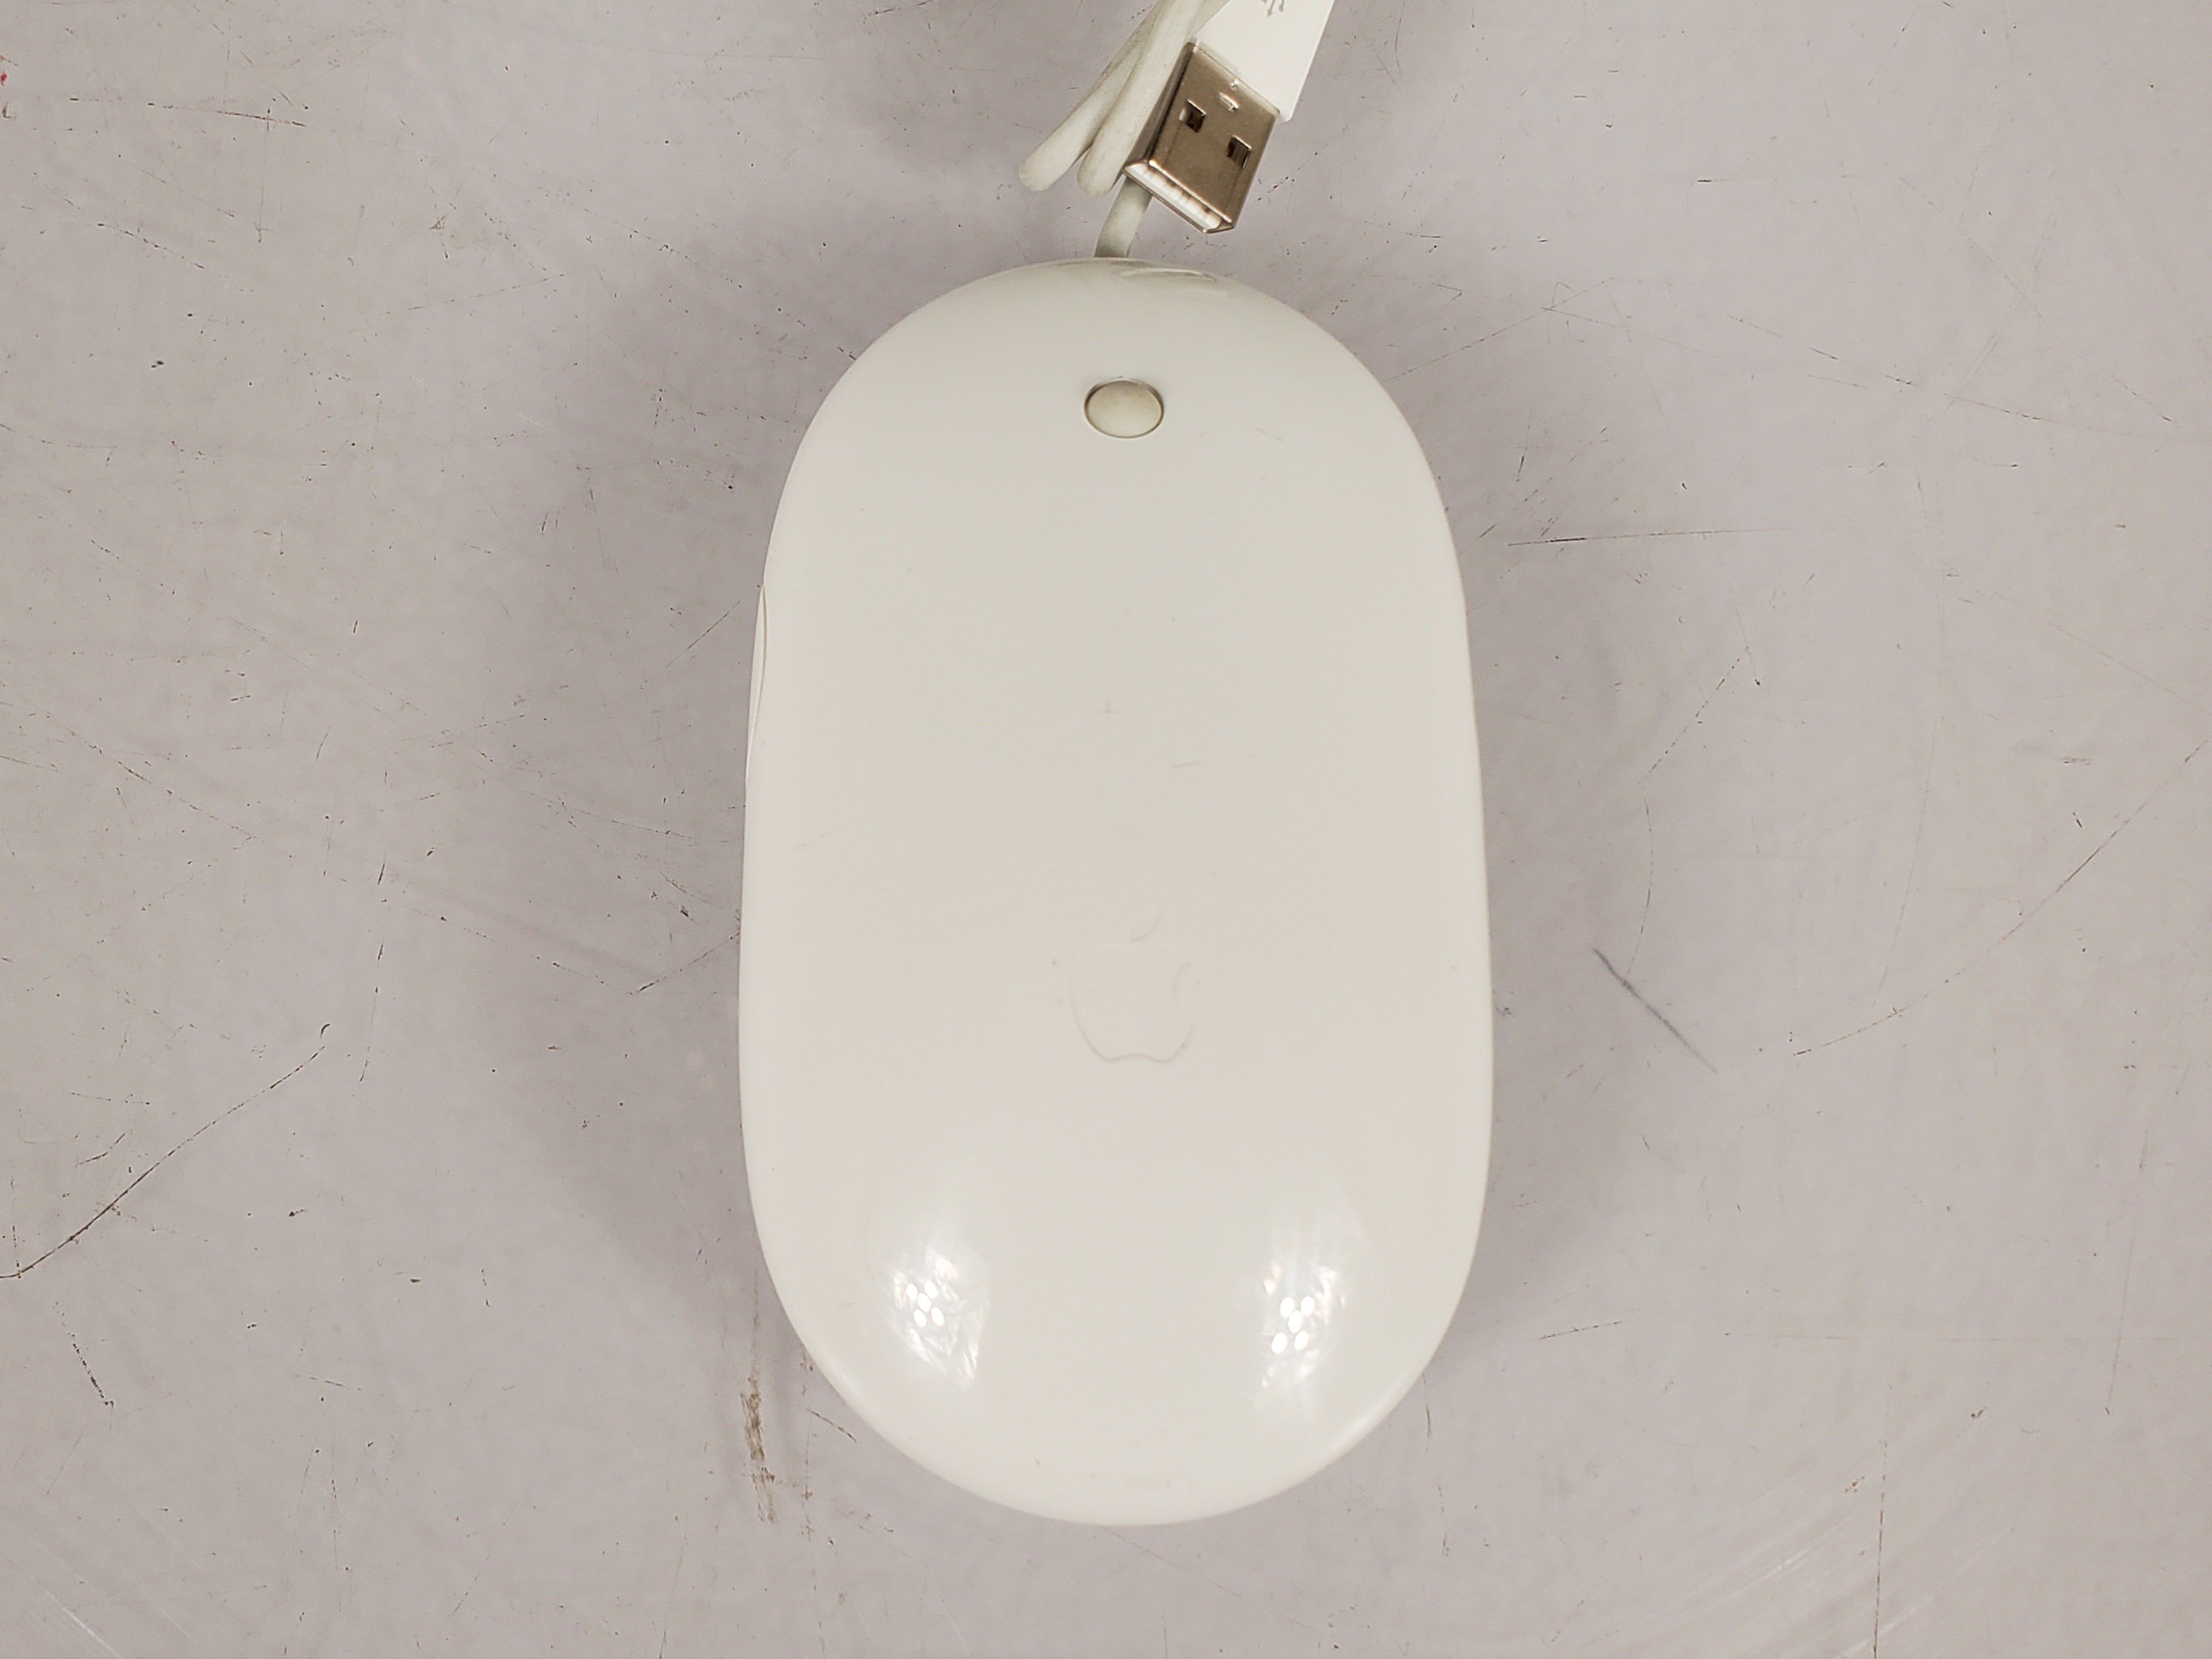 Apple Mighty Mouse A1152 USB Mouse